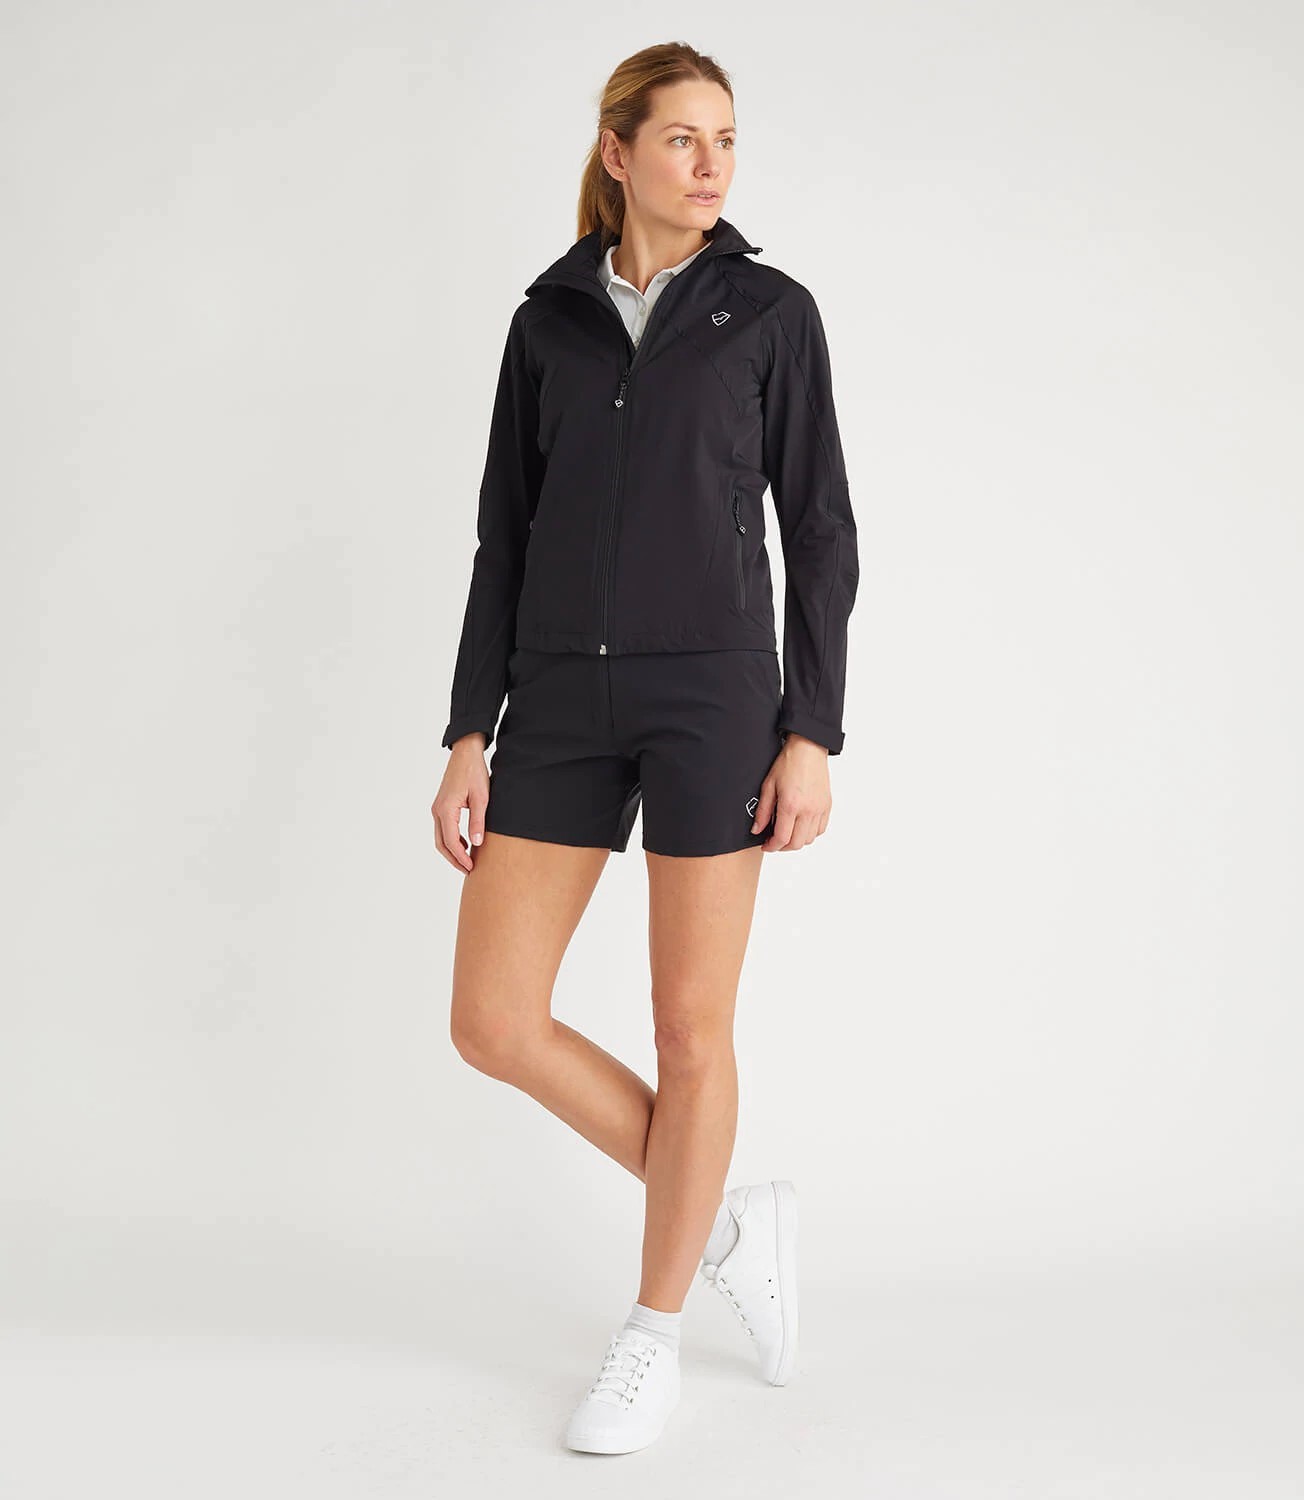 Play Brave Clarice Jacket » Wigmore Sports